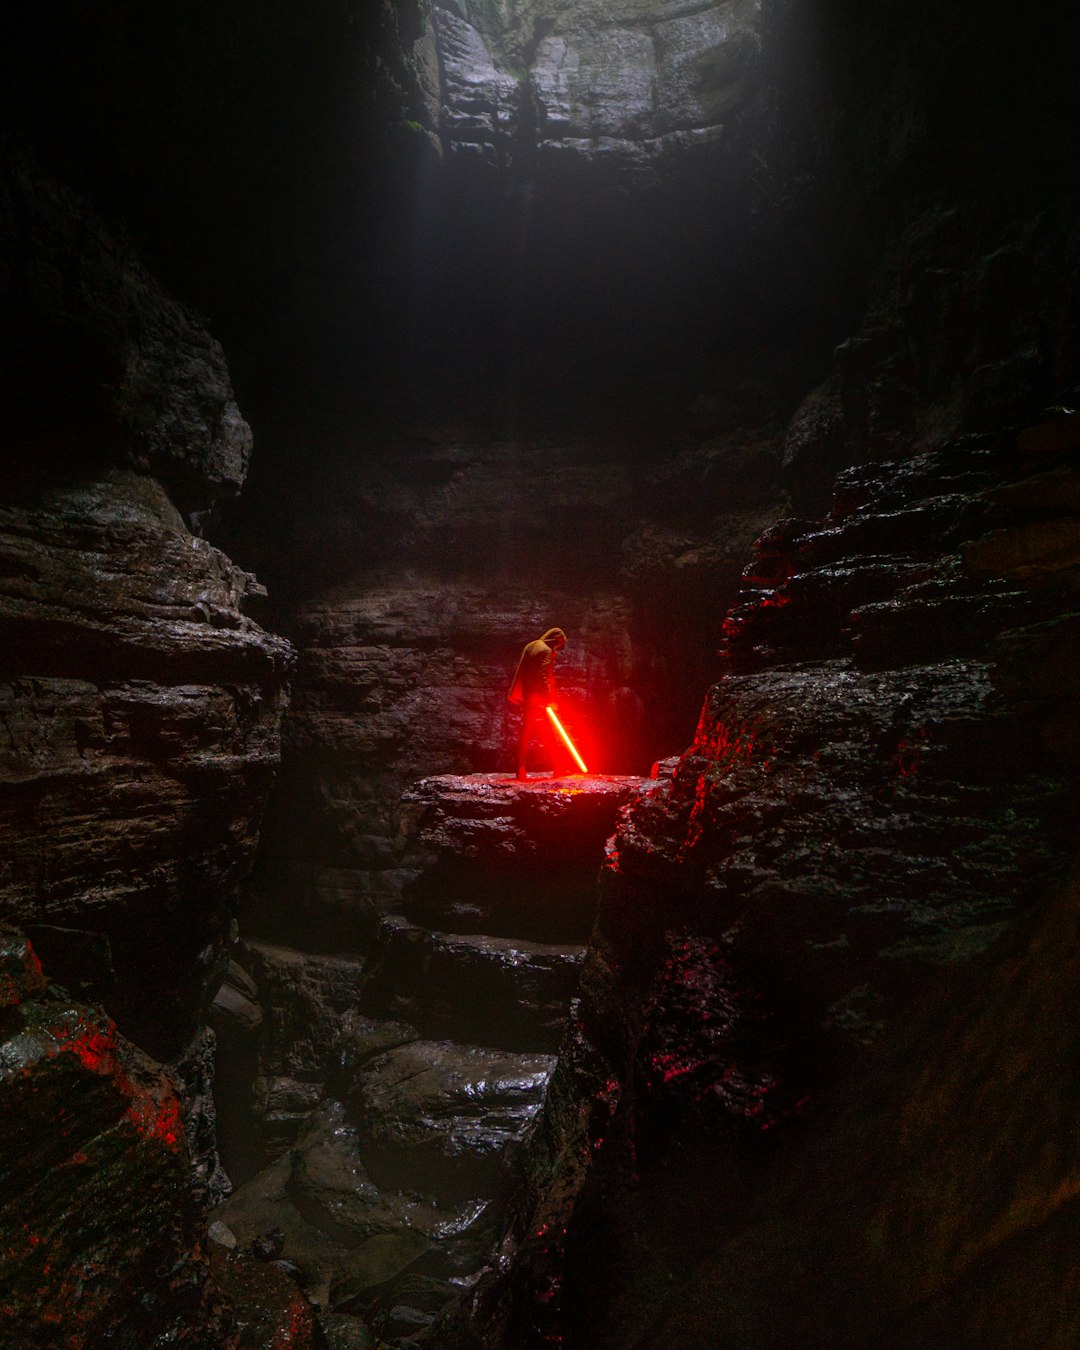 After about a mile hike to the cave, we threw around 200 feet of rope down and started repelling, at the bottom we saw this cool spot and had an idea.  “Brennan, toss me the lightsaber…”